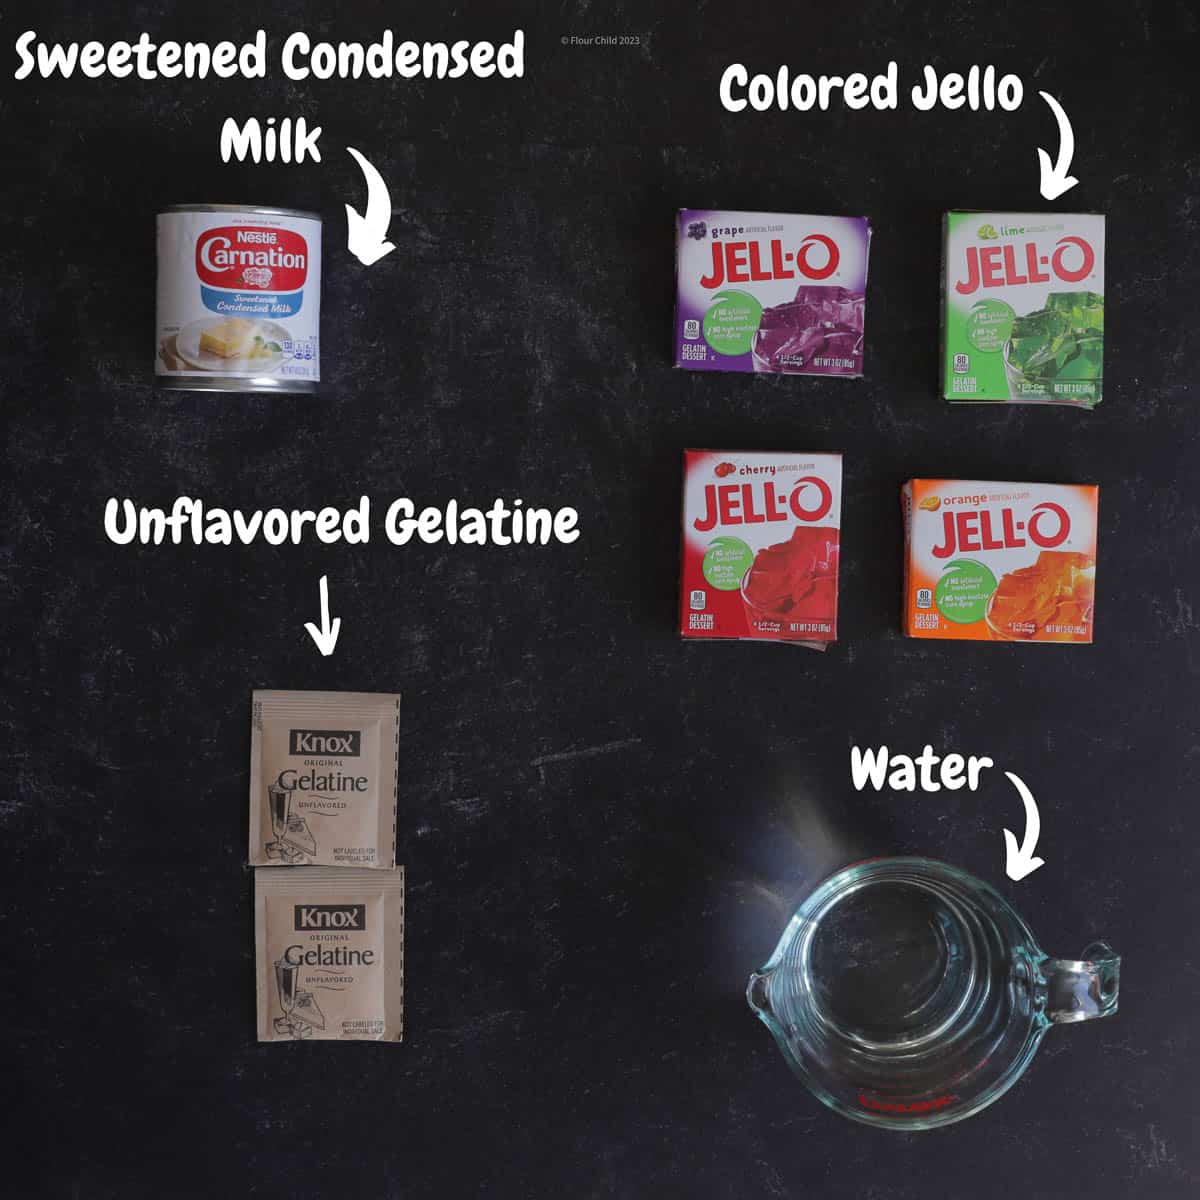 All of the ingredients needed for stained glass Jello on a black background.